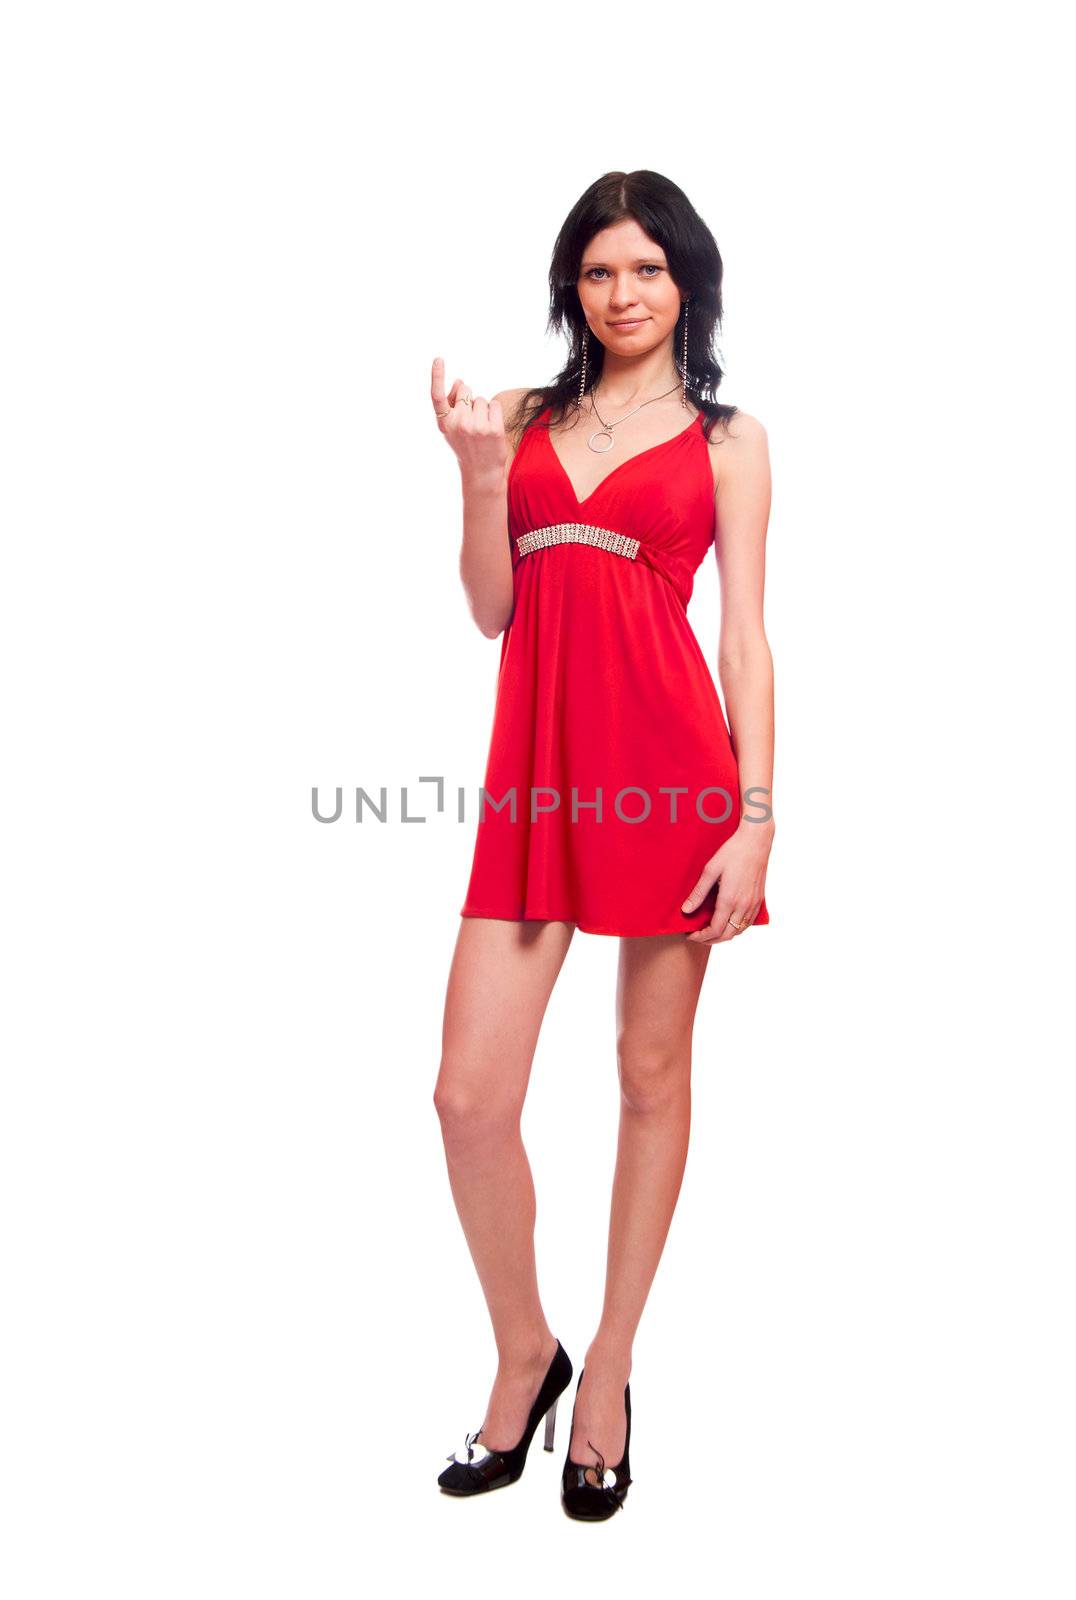 Young woman wearing red dress isolated on white